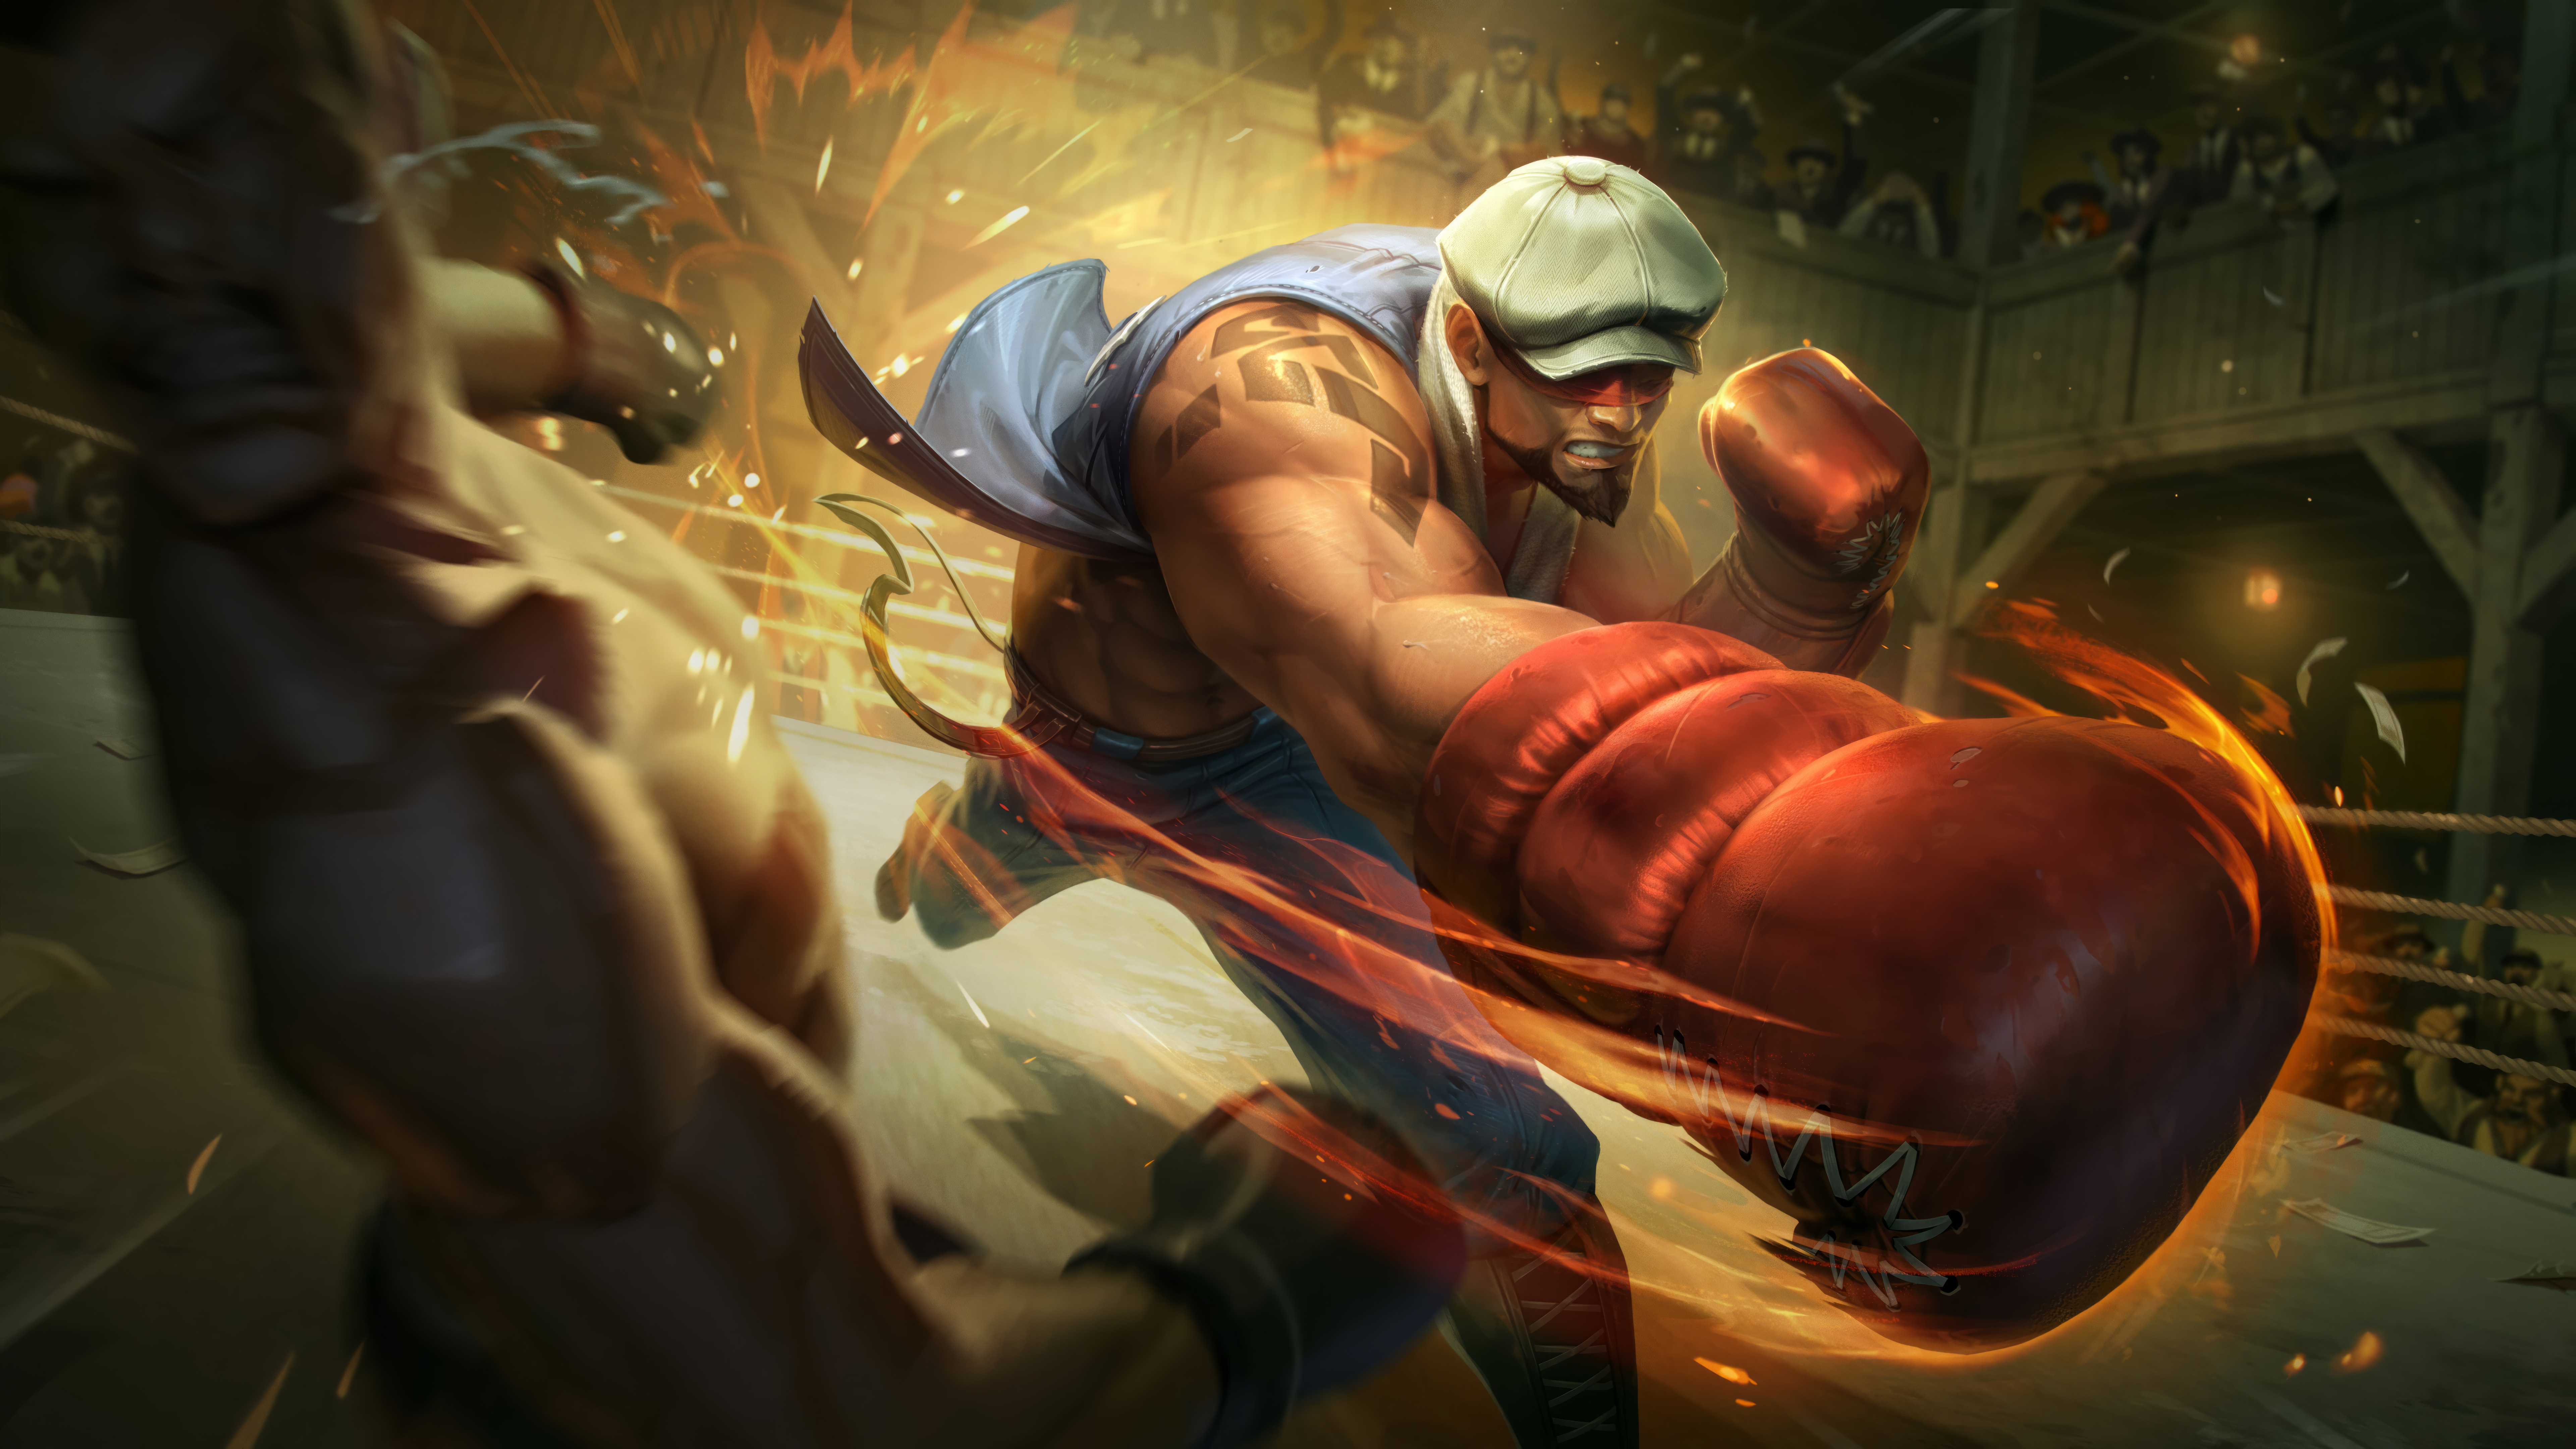 General 7680x4320 Lee Sin (League of Legends) video games GZG Riot Games digital art League of Legends teeth video game characters 4K video game art muscles video game men fighting boxing gloves eyes hidden hat men with hats boxing ring beard crowds abs attack